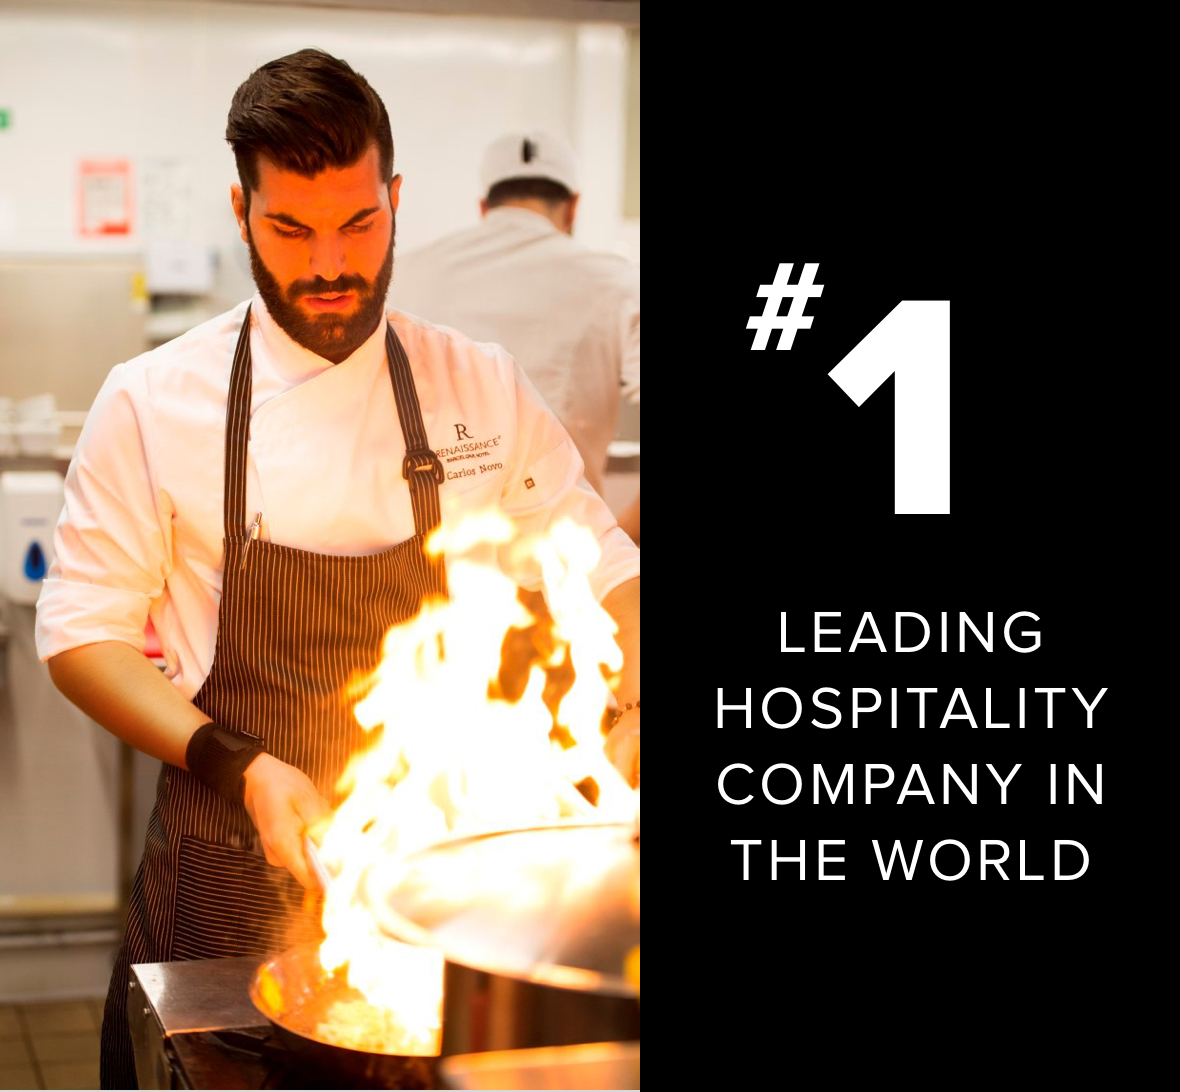 Number one leading hospitality company in the world